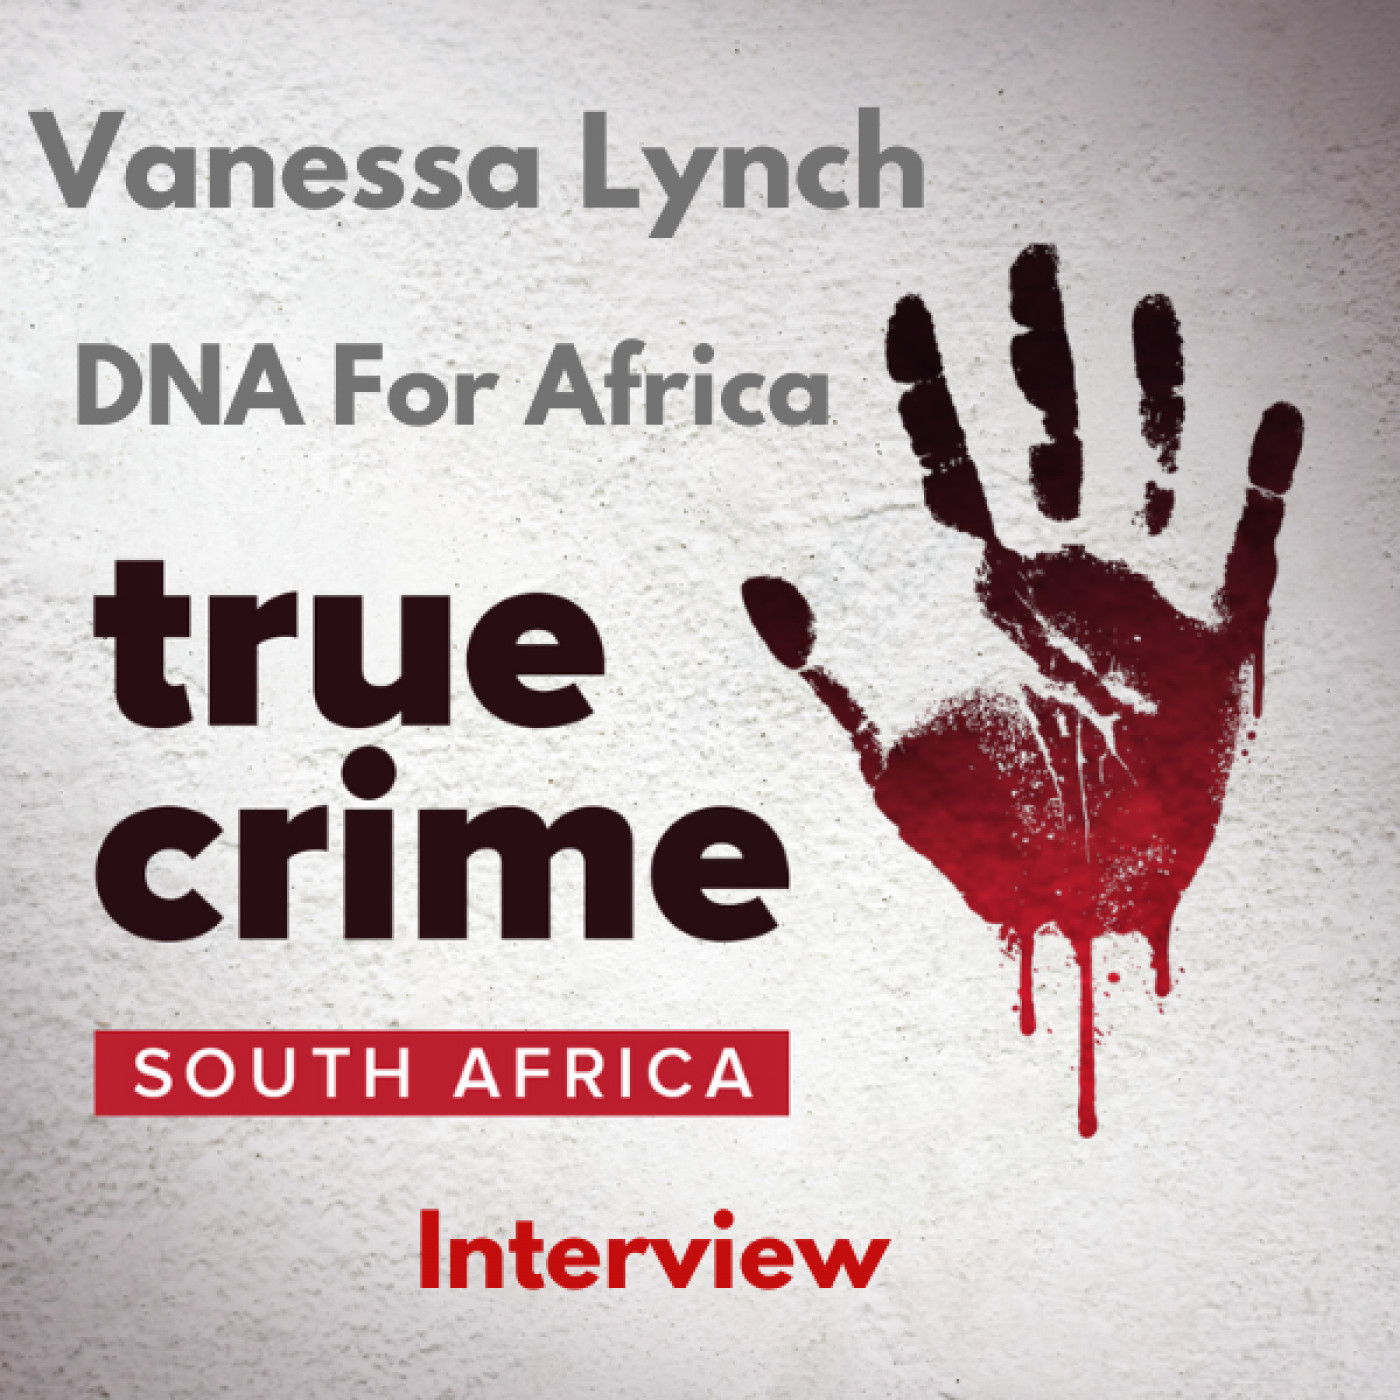 Interview with Vanessa Lynch - DNA For Africa